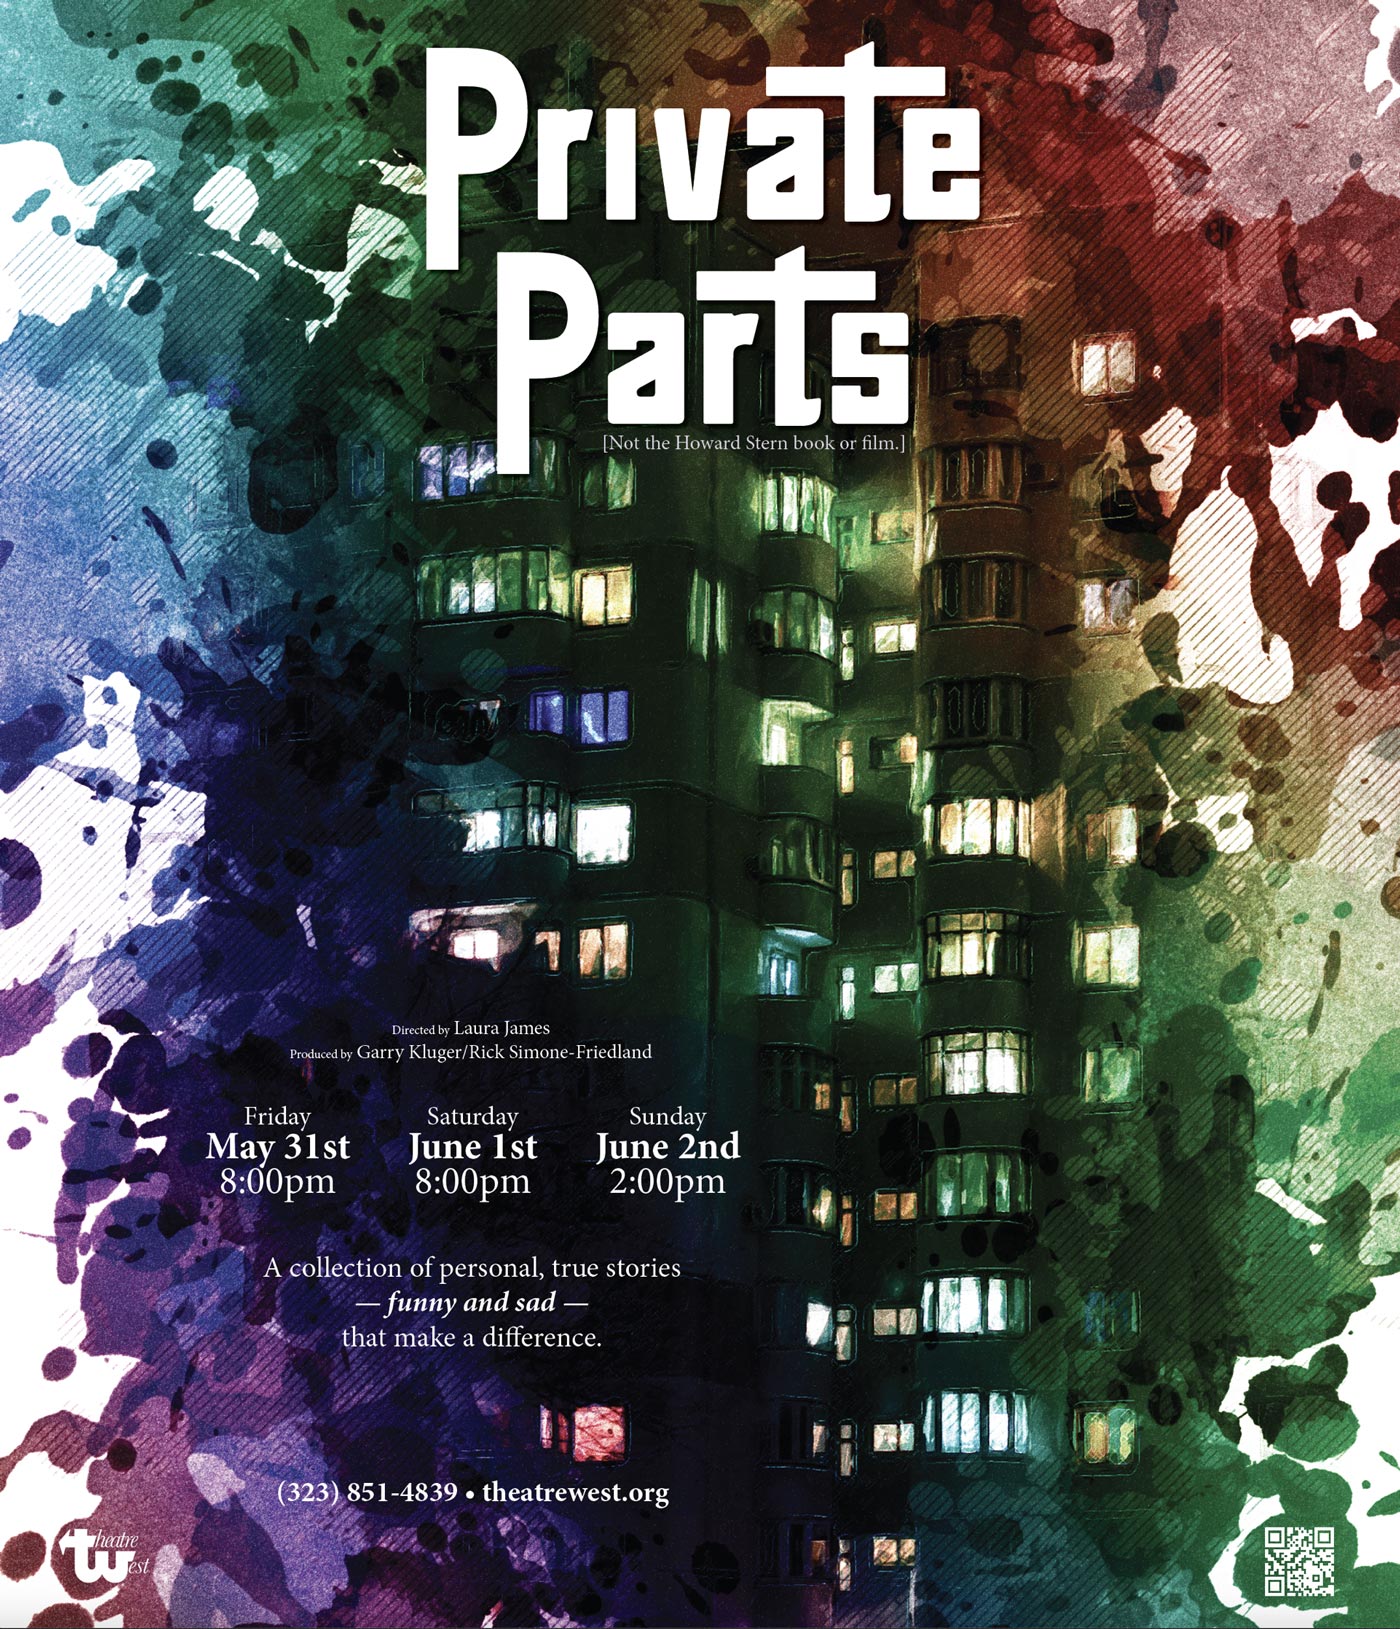 Private Parts Poster for Theatre West